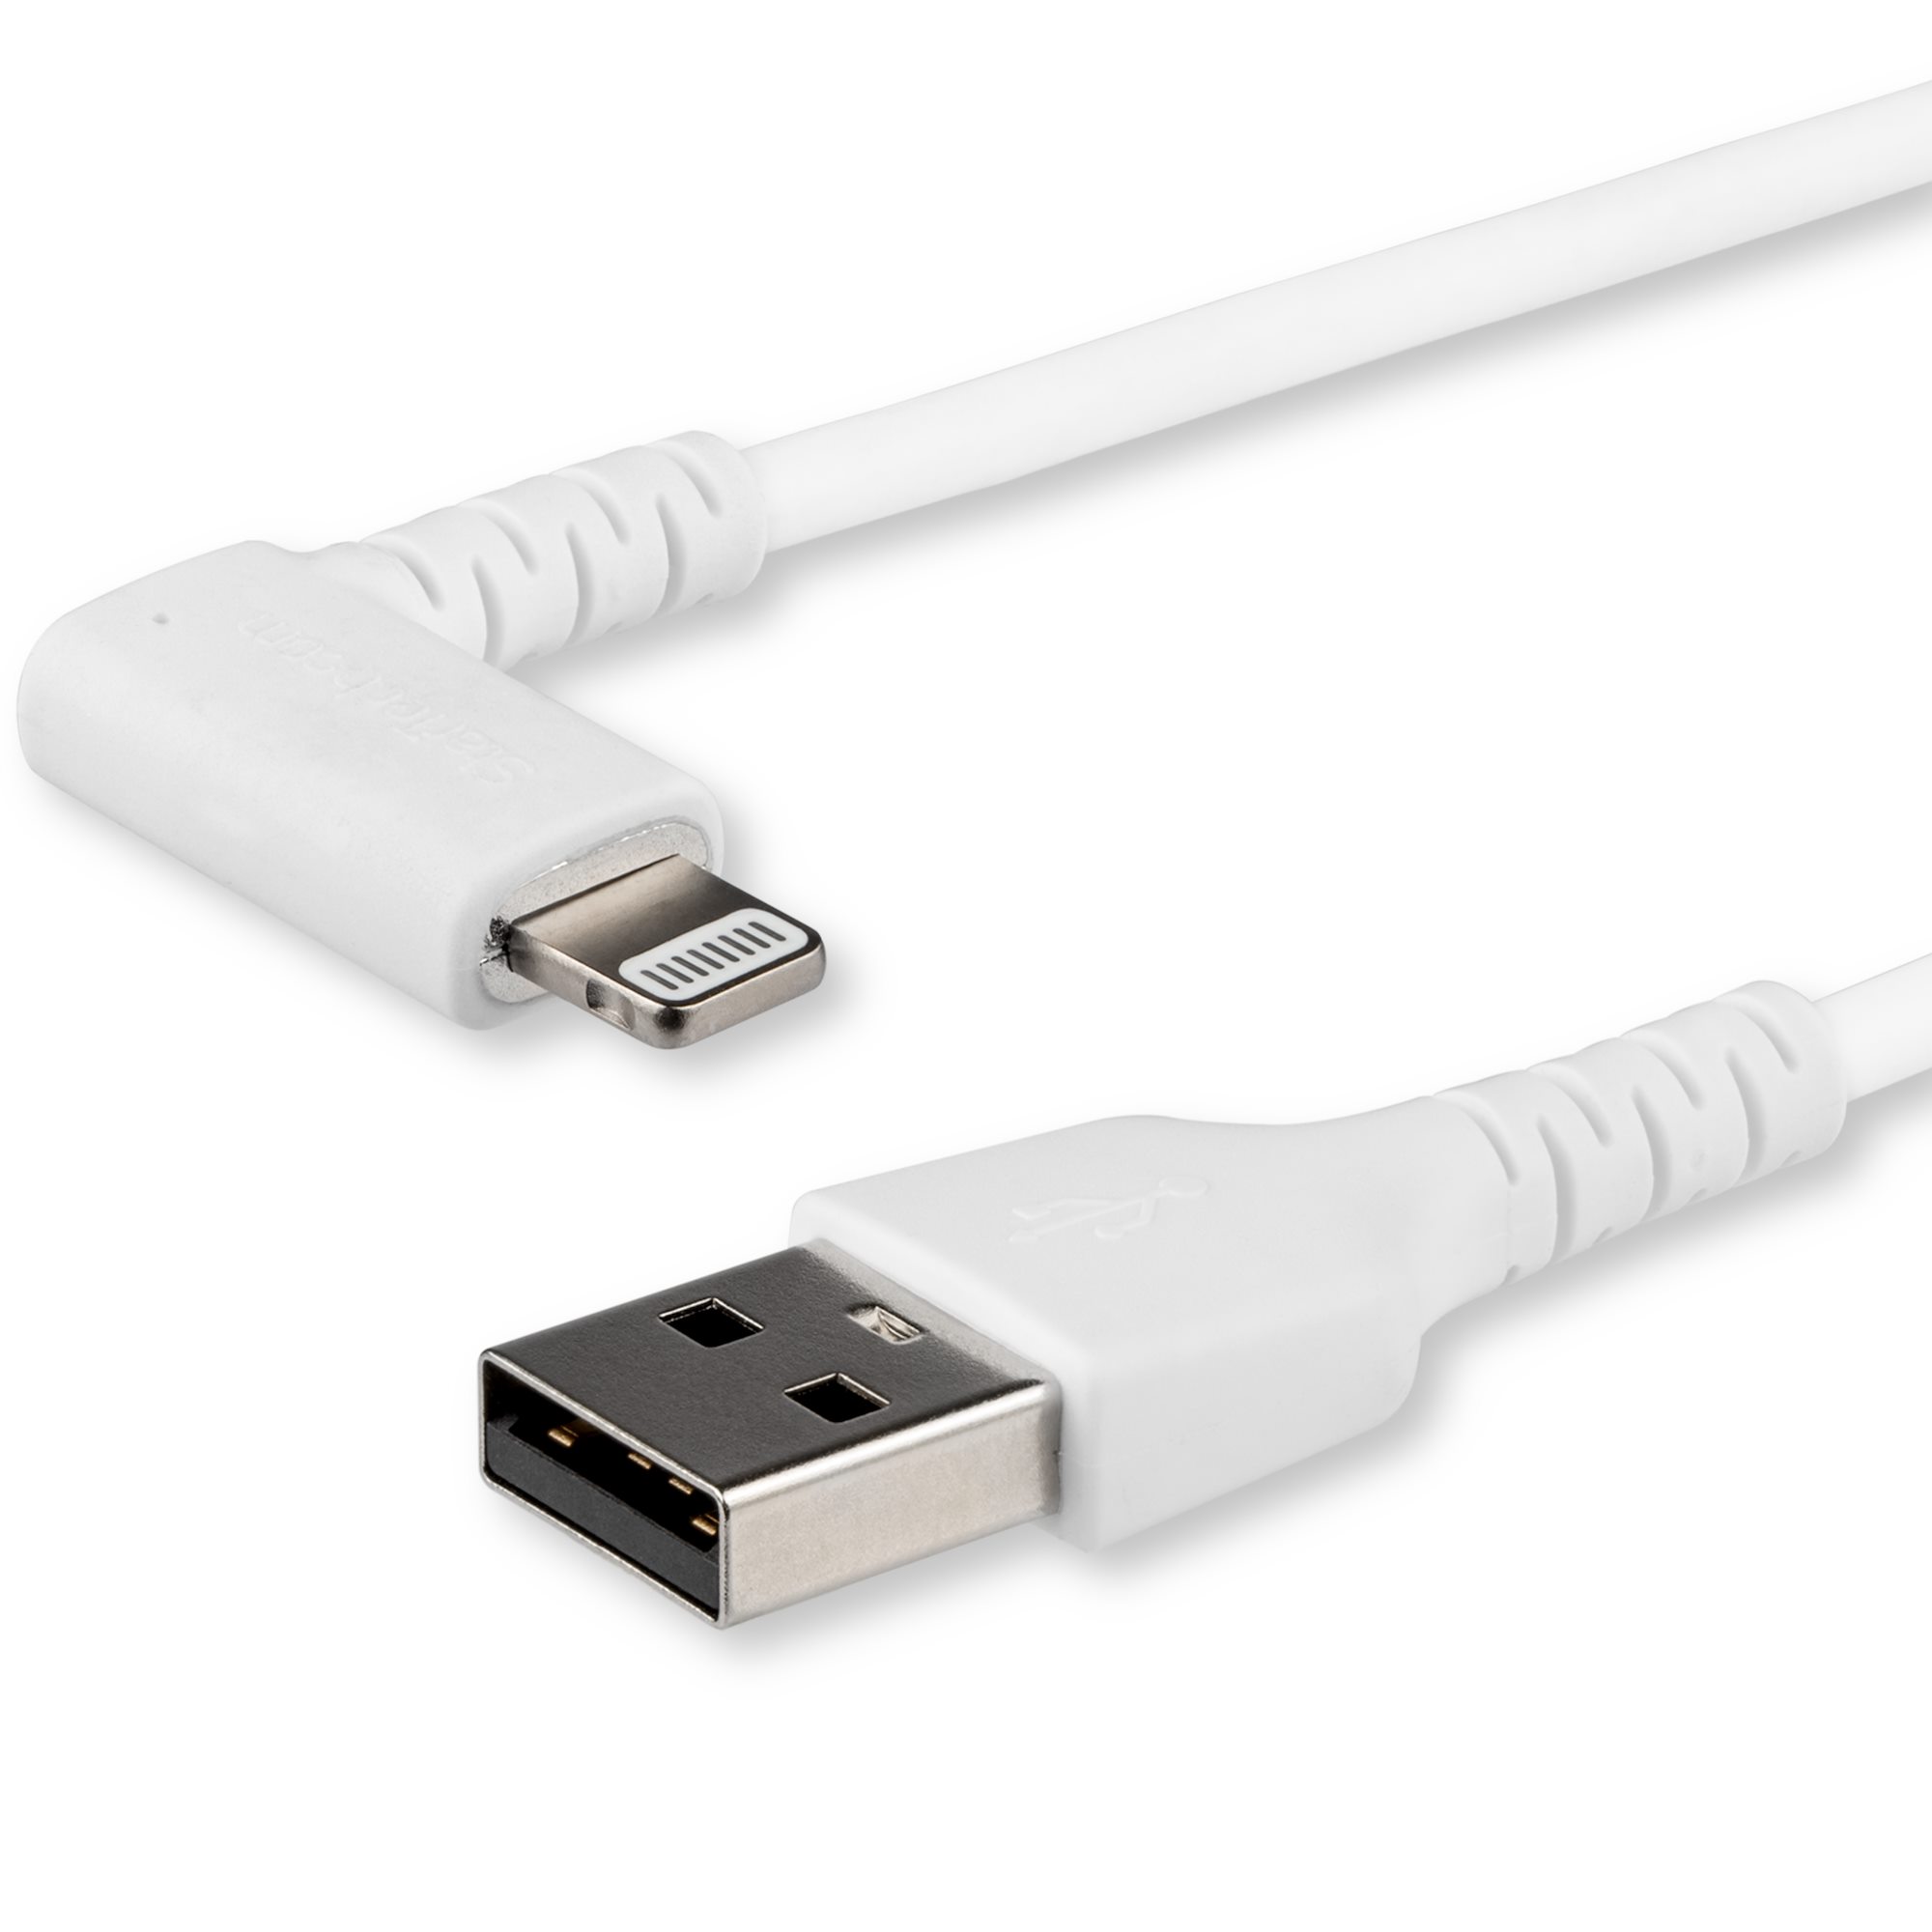 6ft USB A to Lightning Cable Right Angle - Lightning Cables, Cables